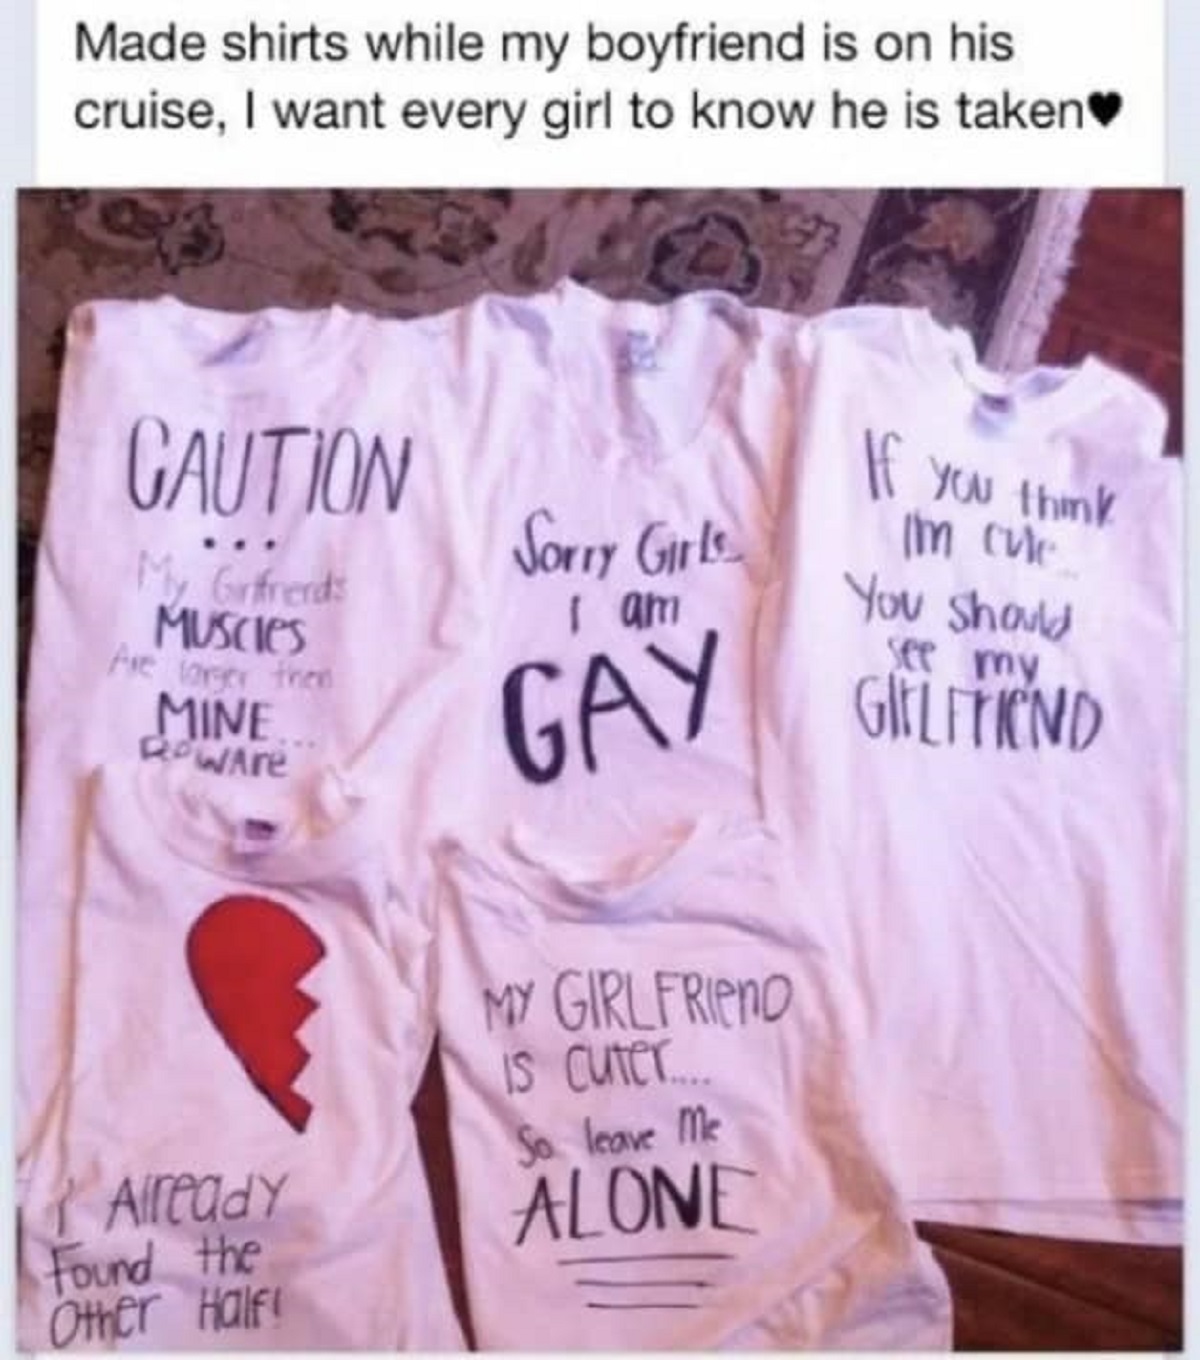 possessive girlfriend - Made shirts while my boyfriend is on his cruise, I want every girl to know he is taken Caution My Gifrerds Muscles Are larger then Mine RowAre Sorry Girls.. I am Gay If you think I'm cute You should see my Gilffind Already Found th